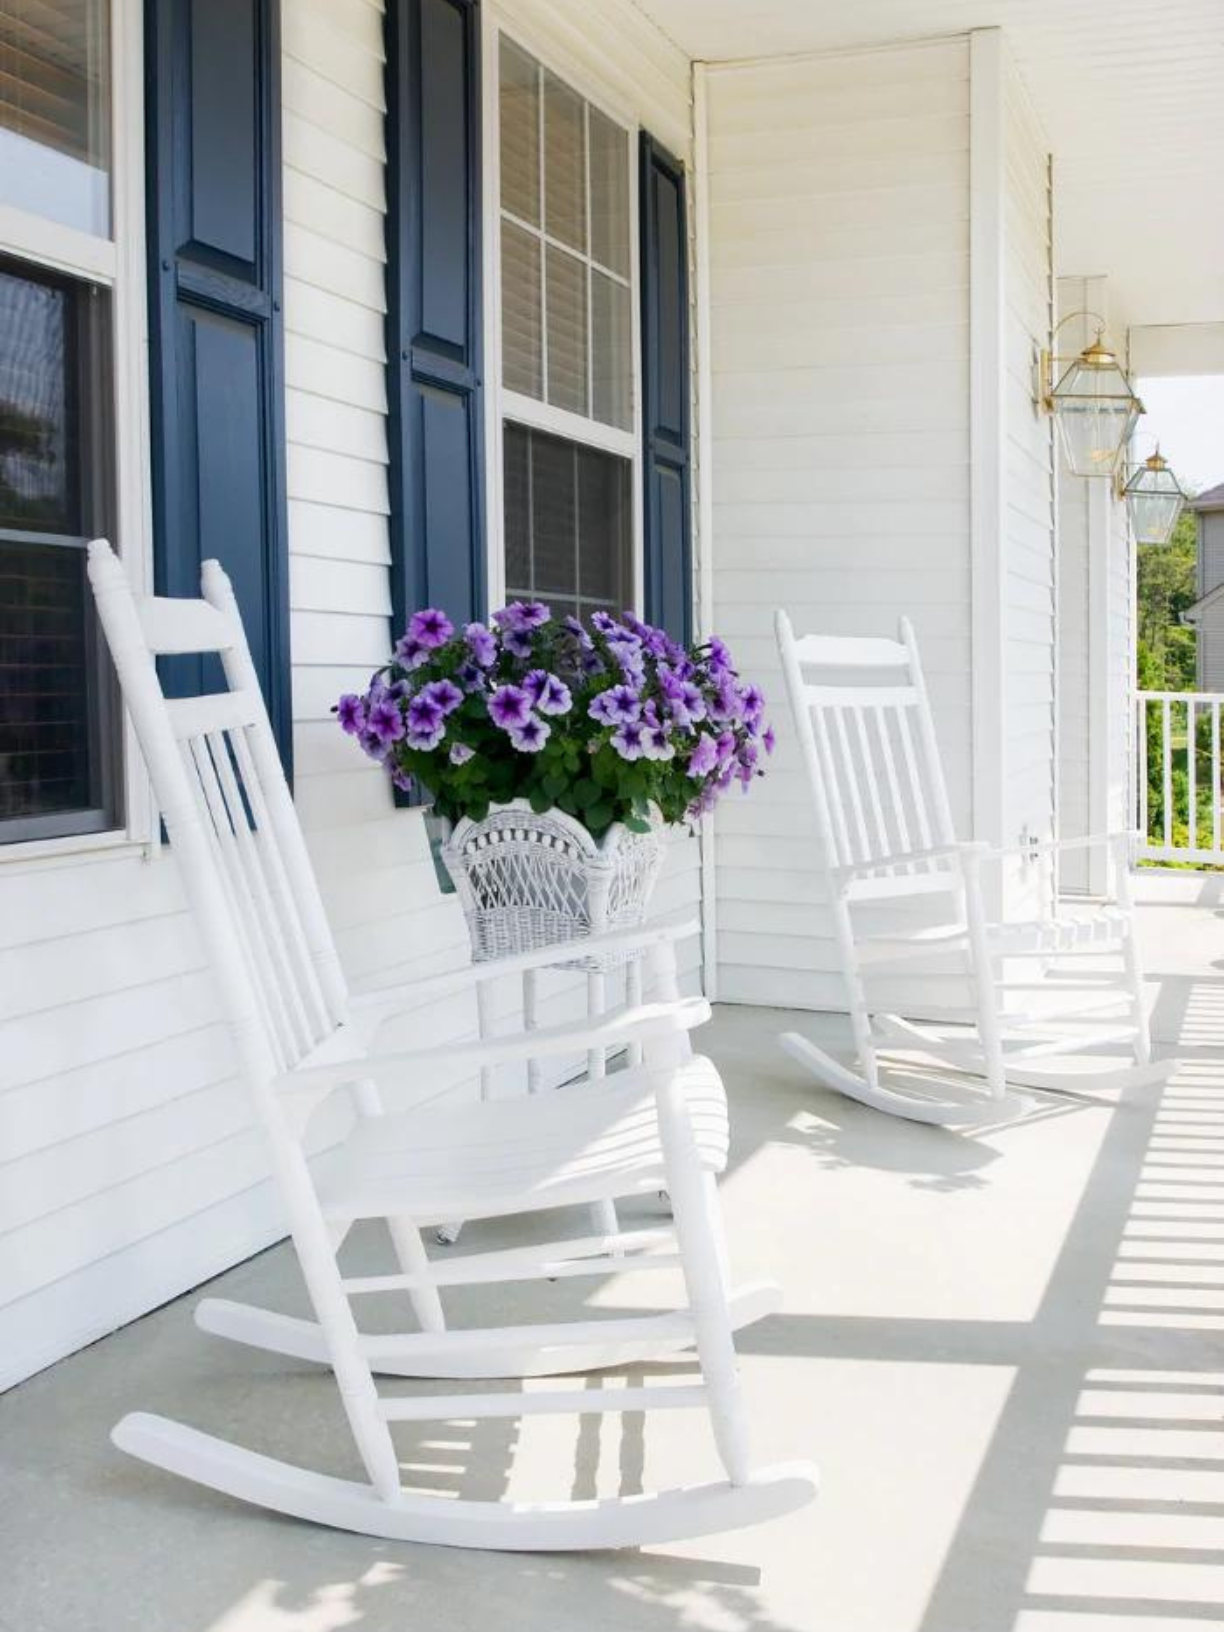 5 Tips for Outdoor Staging that Will Delight Potential Buyers